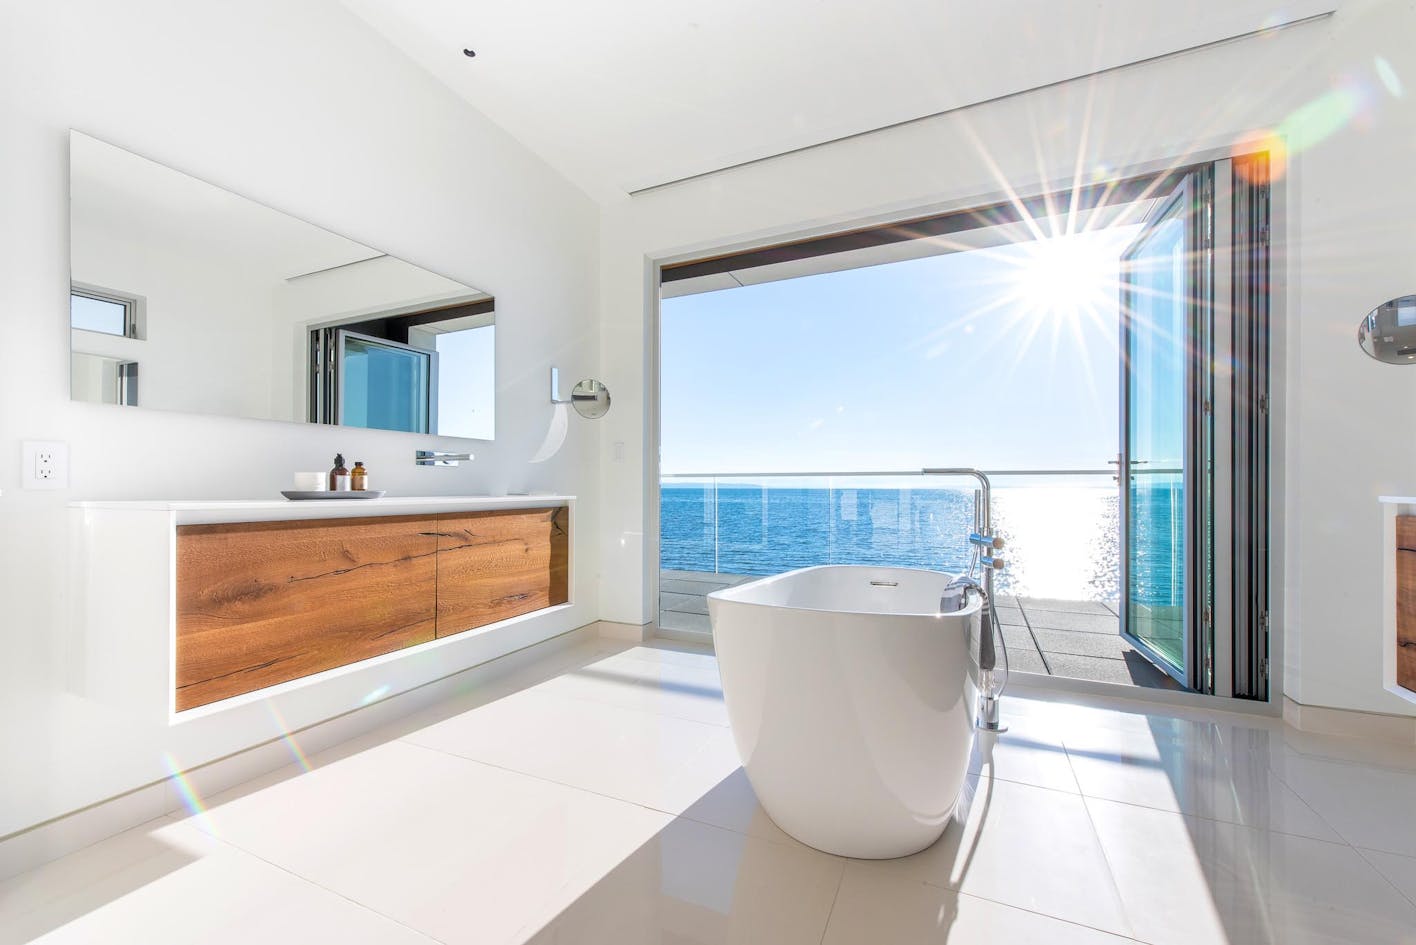 bathroom with a view through exterior moving glass walls